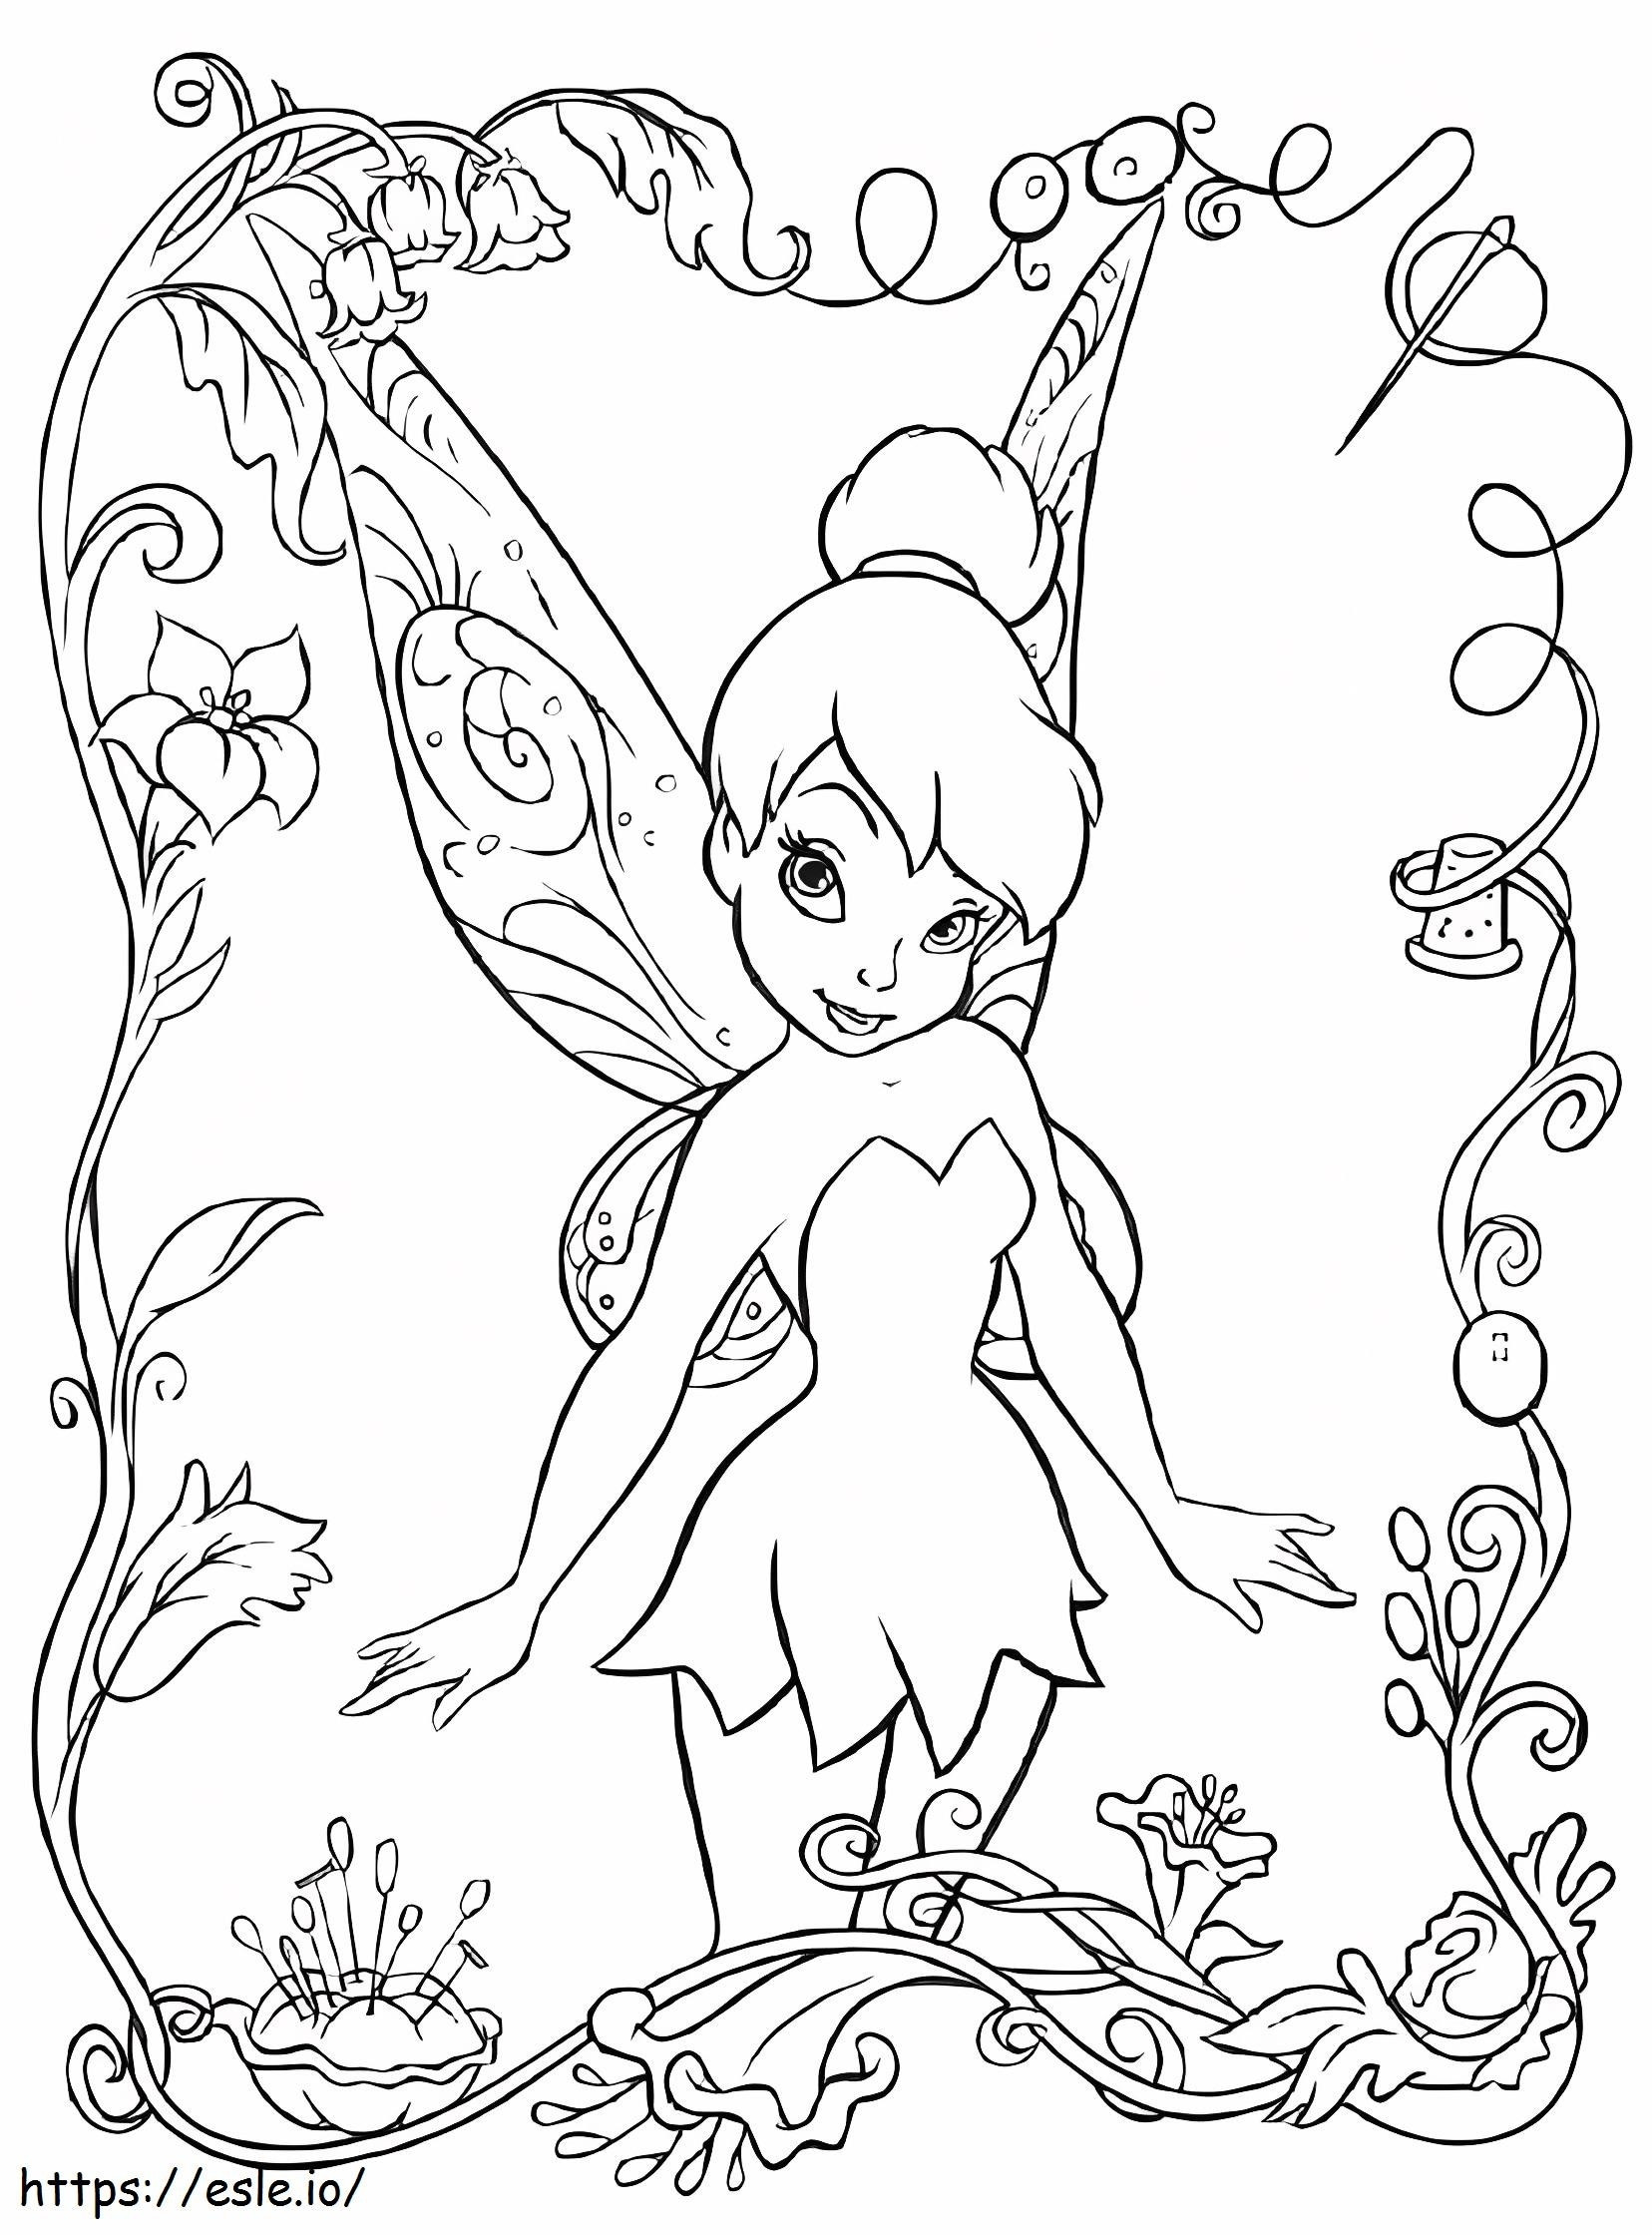 Basic Tinkerbell coloring page